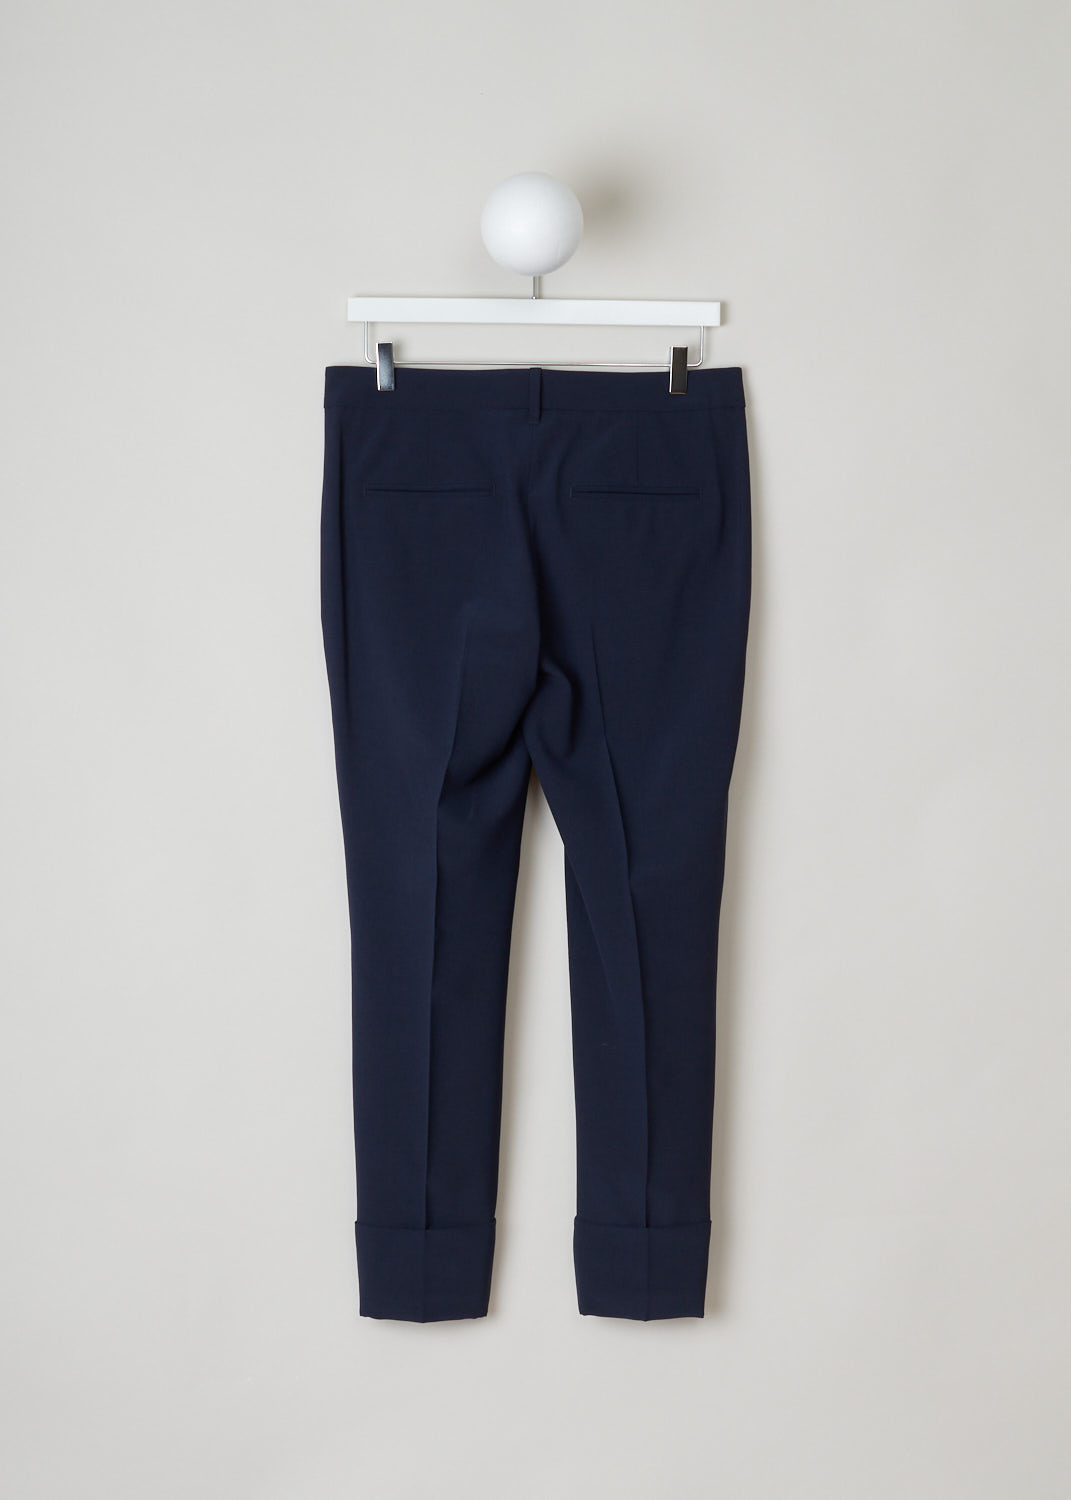 Brunello Cucinelli, midnight blue pants, MF533P6457_C2891, blue silver, back, Lovely wool navy pants. Featuring a cropped length with a wide turn up. The front has two slant pockets, the back has two welt pockets. The waistband has a metal detail for closure, with a push button and a French bearer button at the inside.